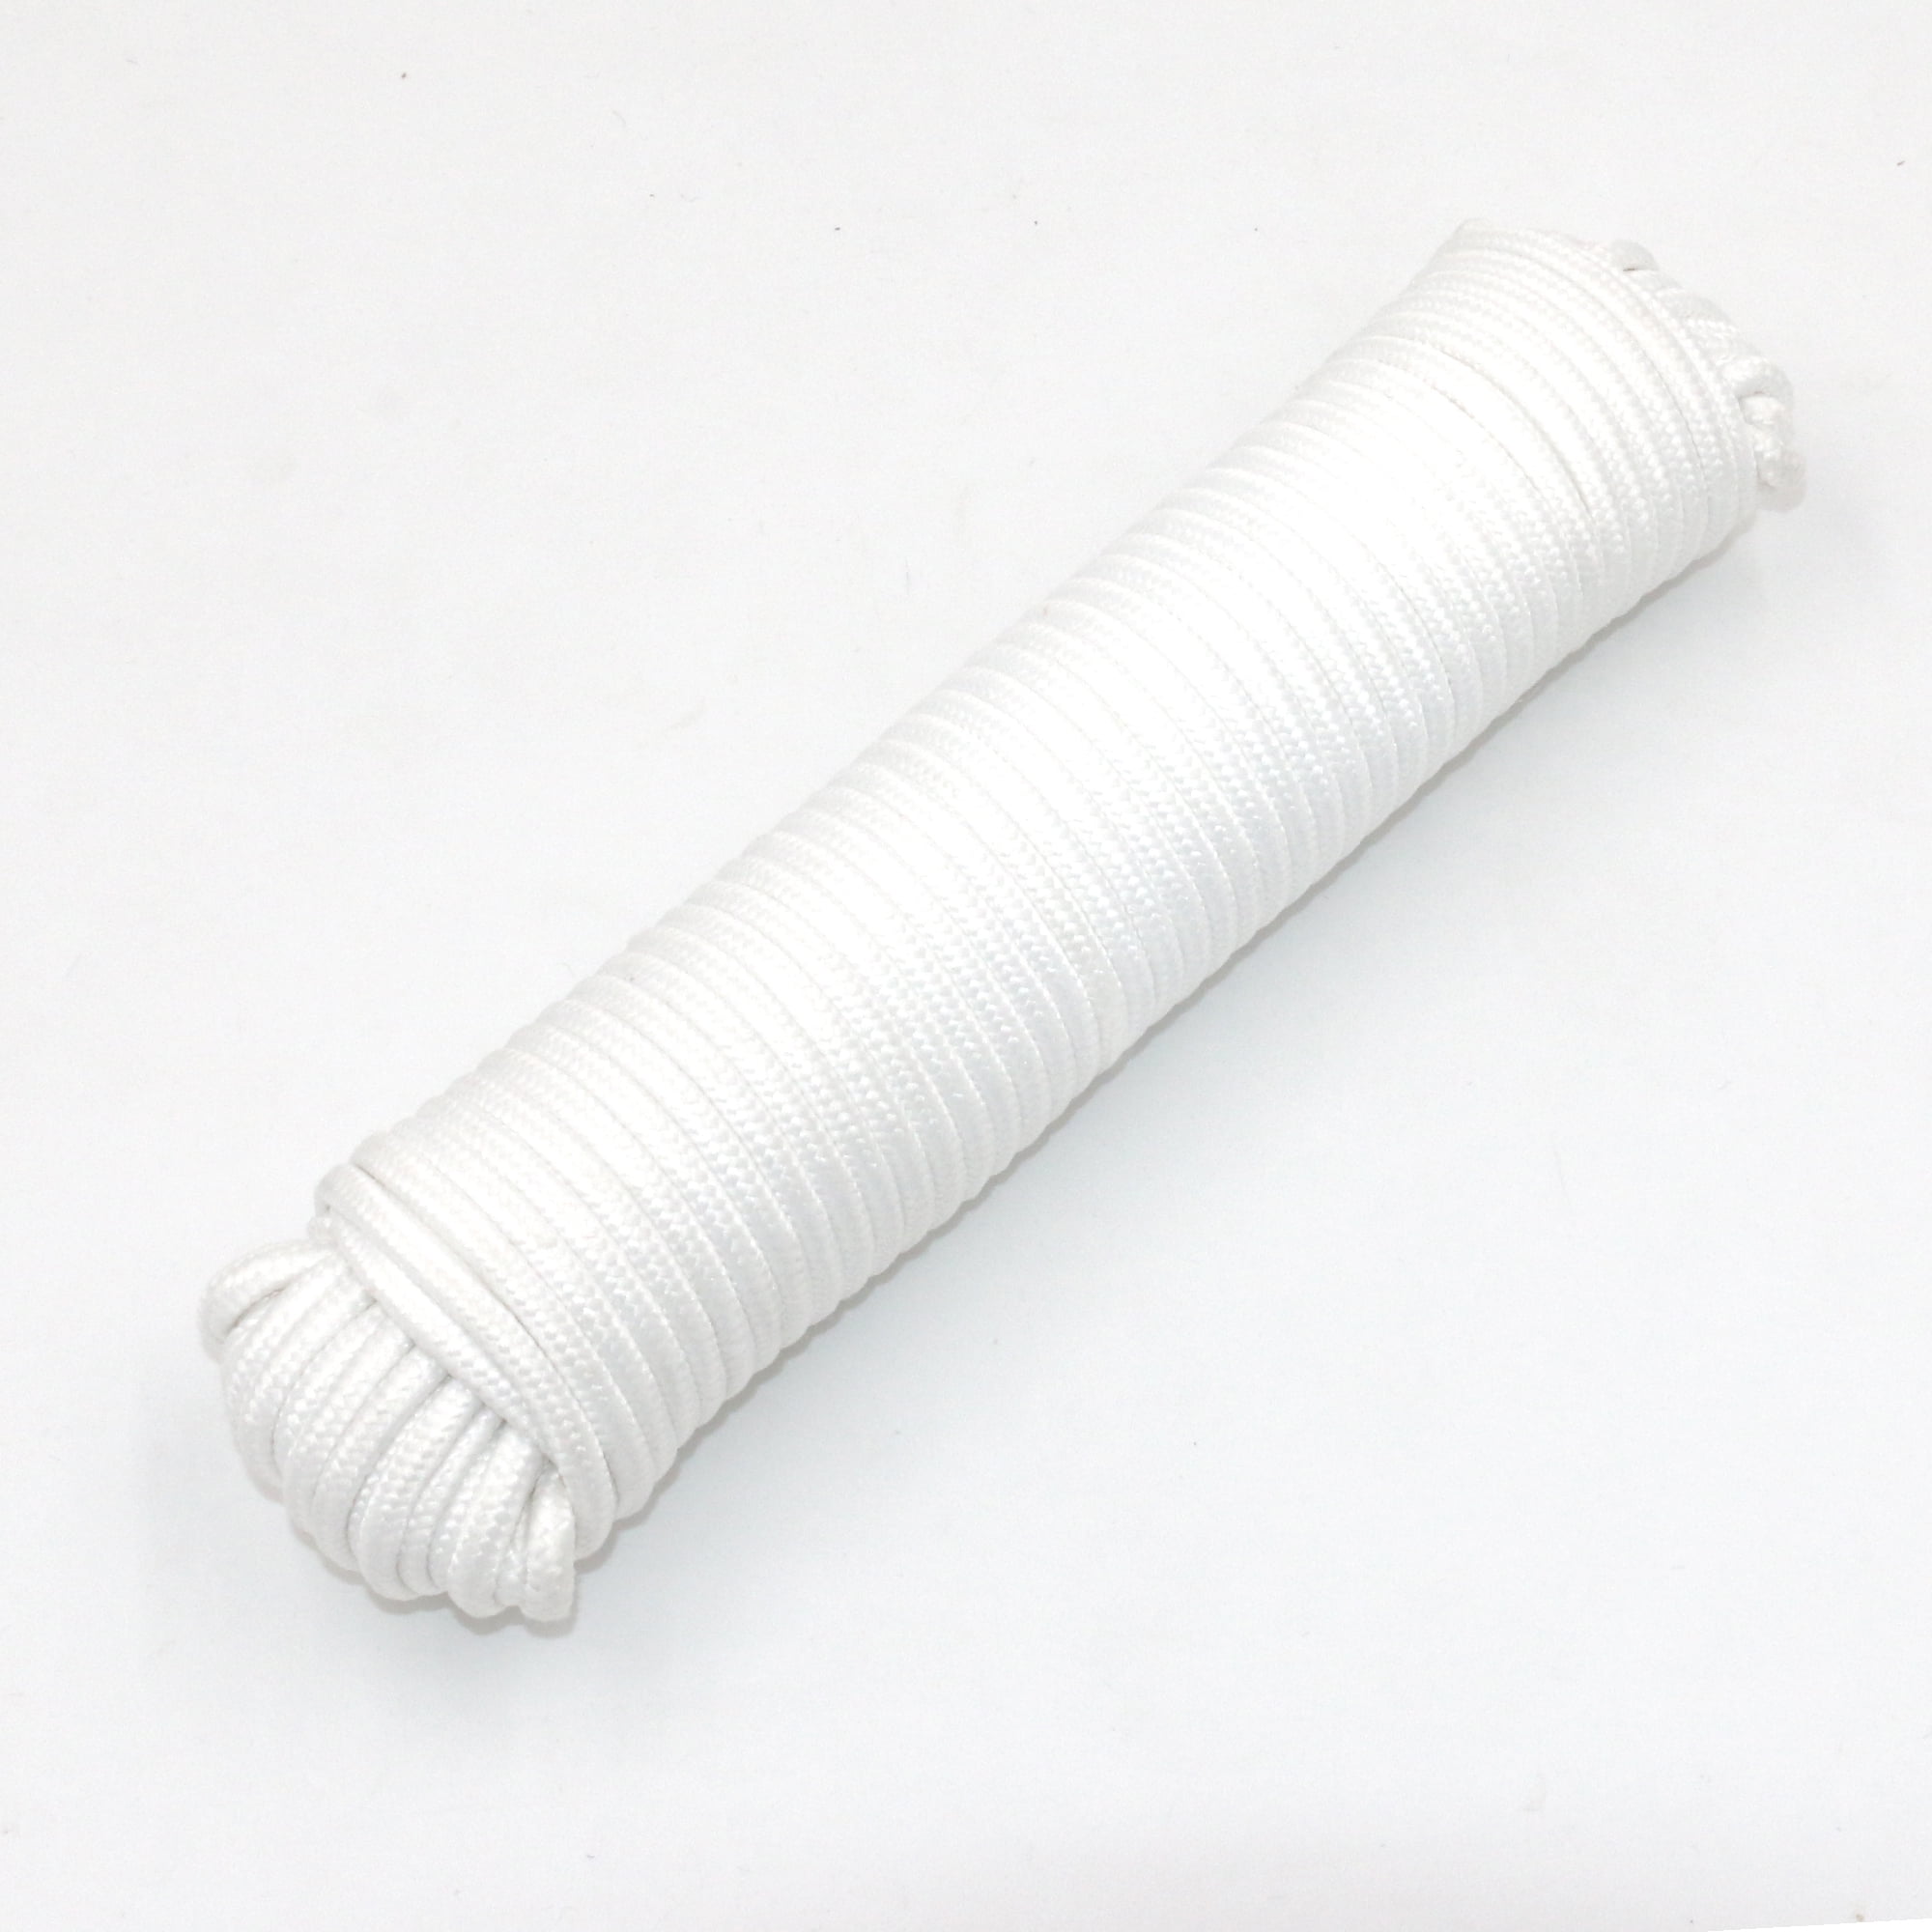 M-D Building Products 100ft. Replacement Chalk Line, 00687. Strong white  braided poly/cotton material for maximum durability. 